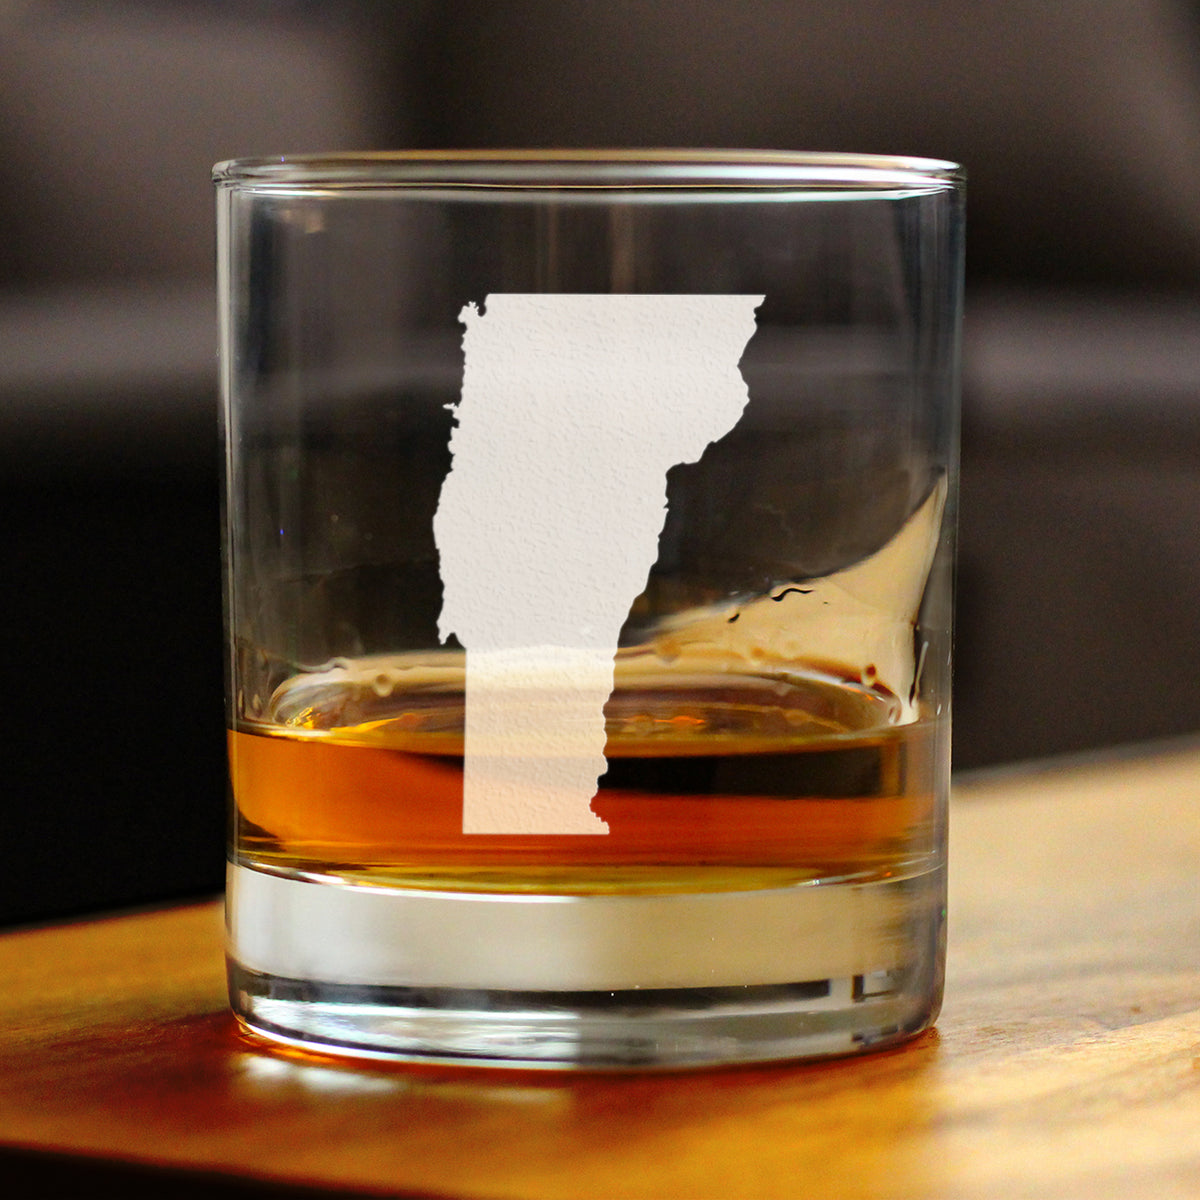 Vermont State Outline Whiskey Rocks Glass - State Themed Drinking Decor and Gifts for Vermonter Women &amp; Men - 10.25 Oz Whisky Tumbler Glasses